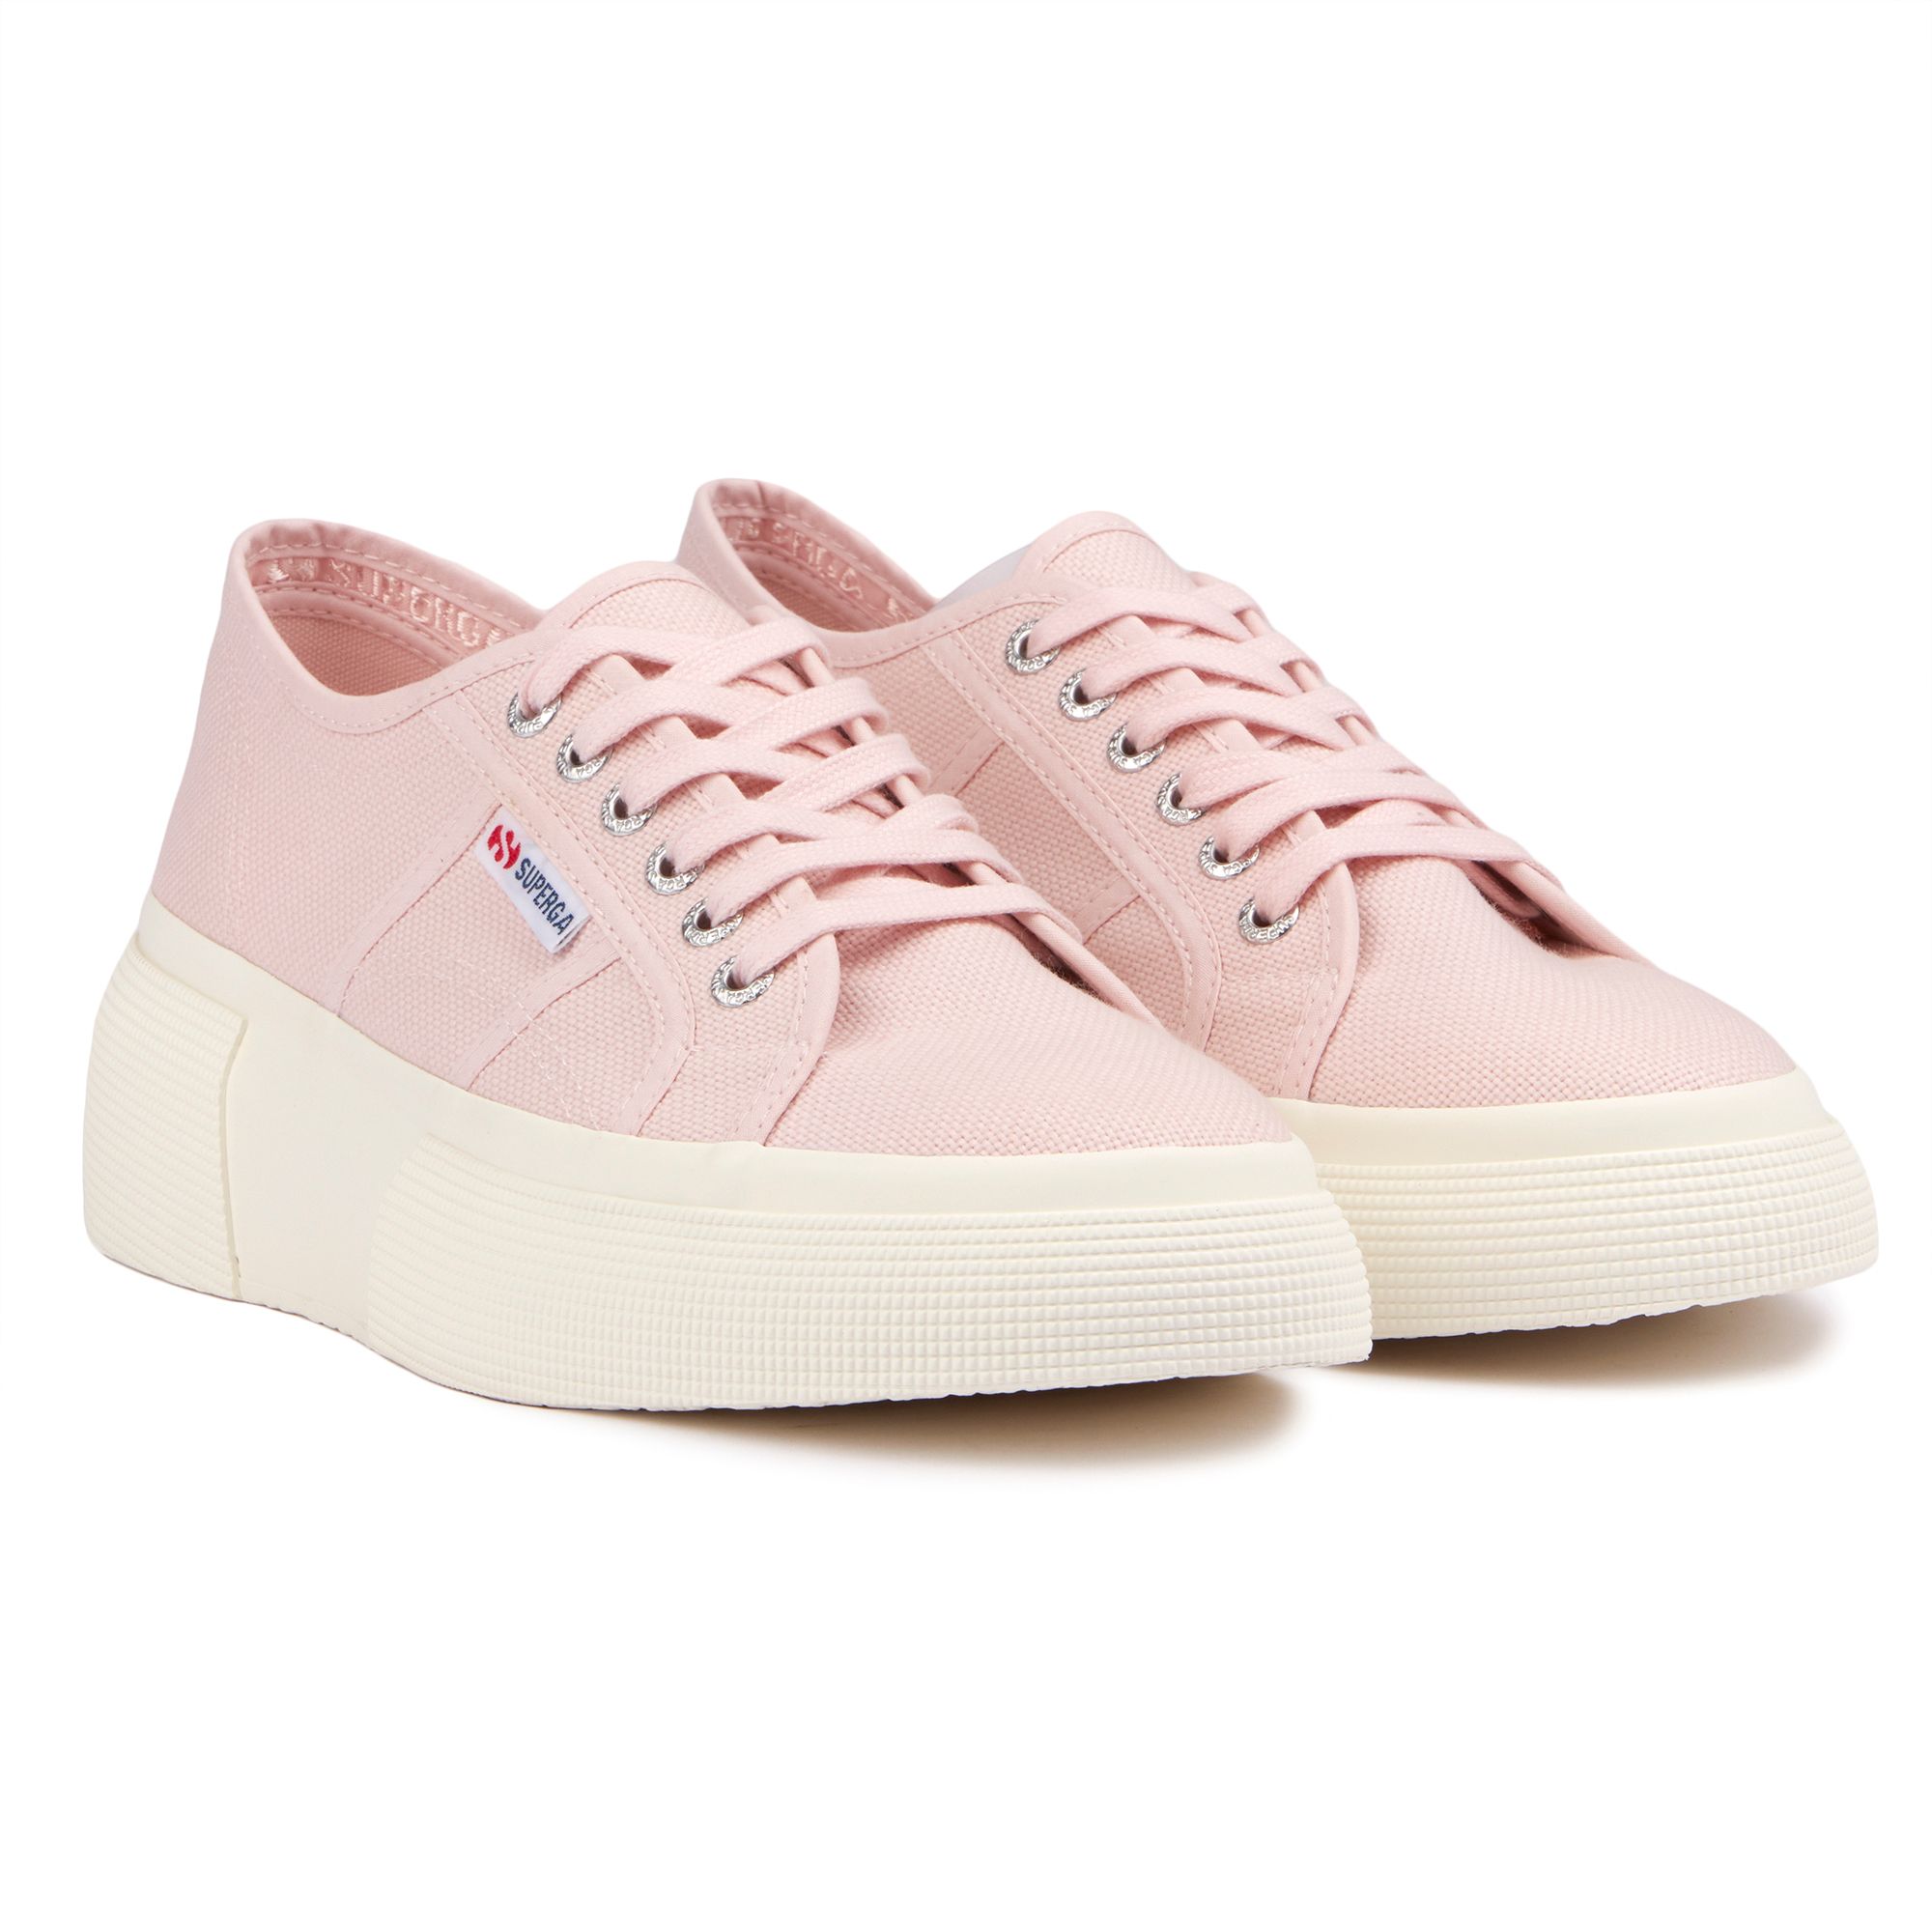 Womens Superga 2287 Bubble Sneakers In Pink Ish | Soletrader